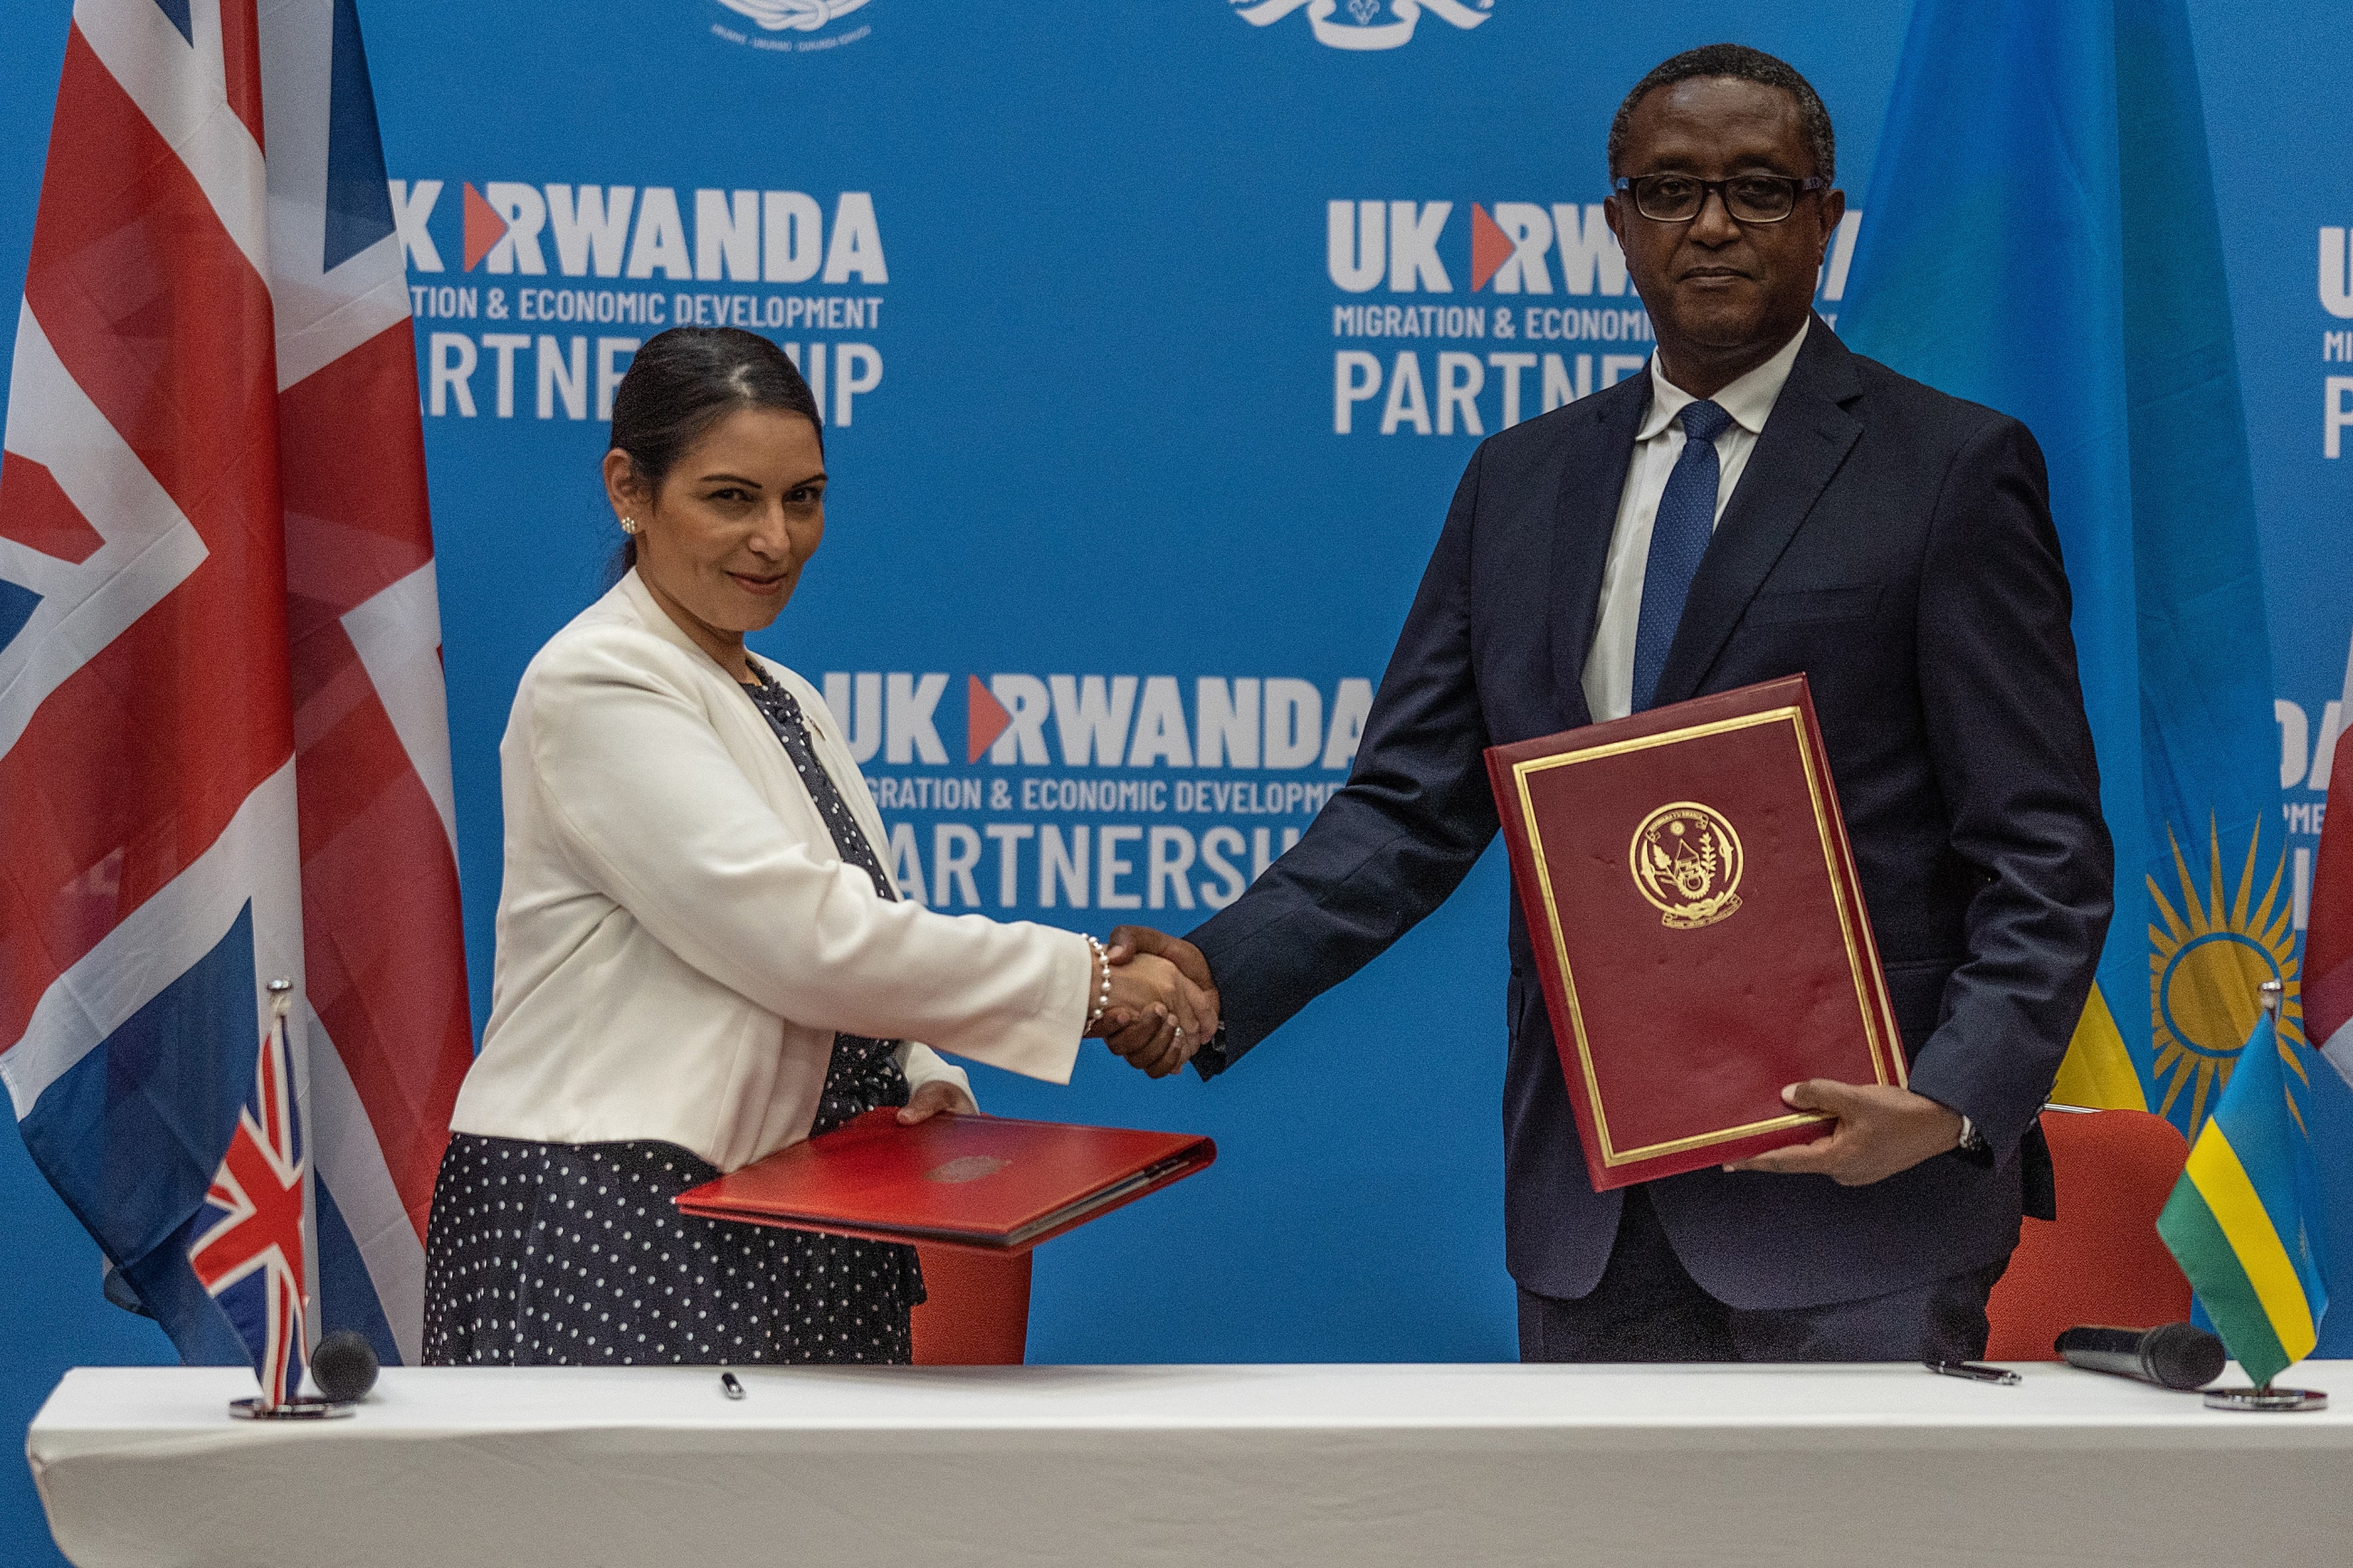 British Home Secretary Priti Patel and Rwandan Minister of Foreign Affairs and International Cooperation Vincent Biruta shake hands after signing an agreement in Kigali, Rwanda on 14 April 2022 (AFP)